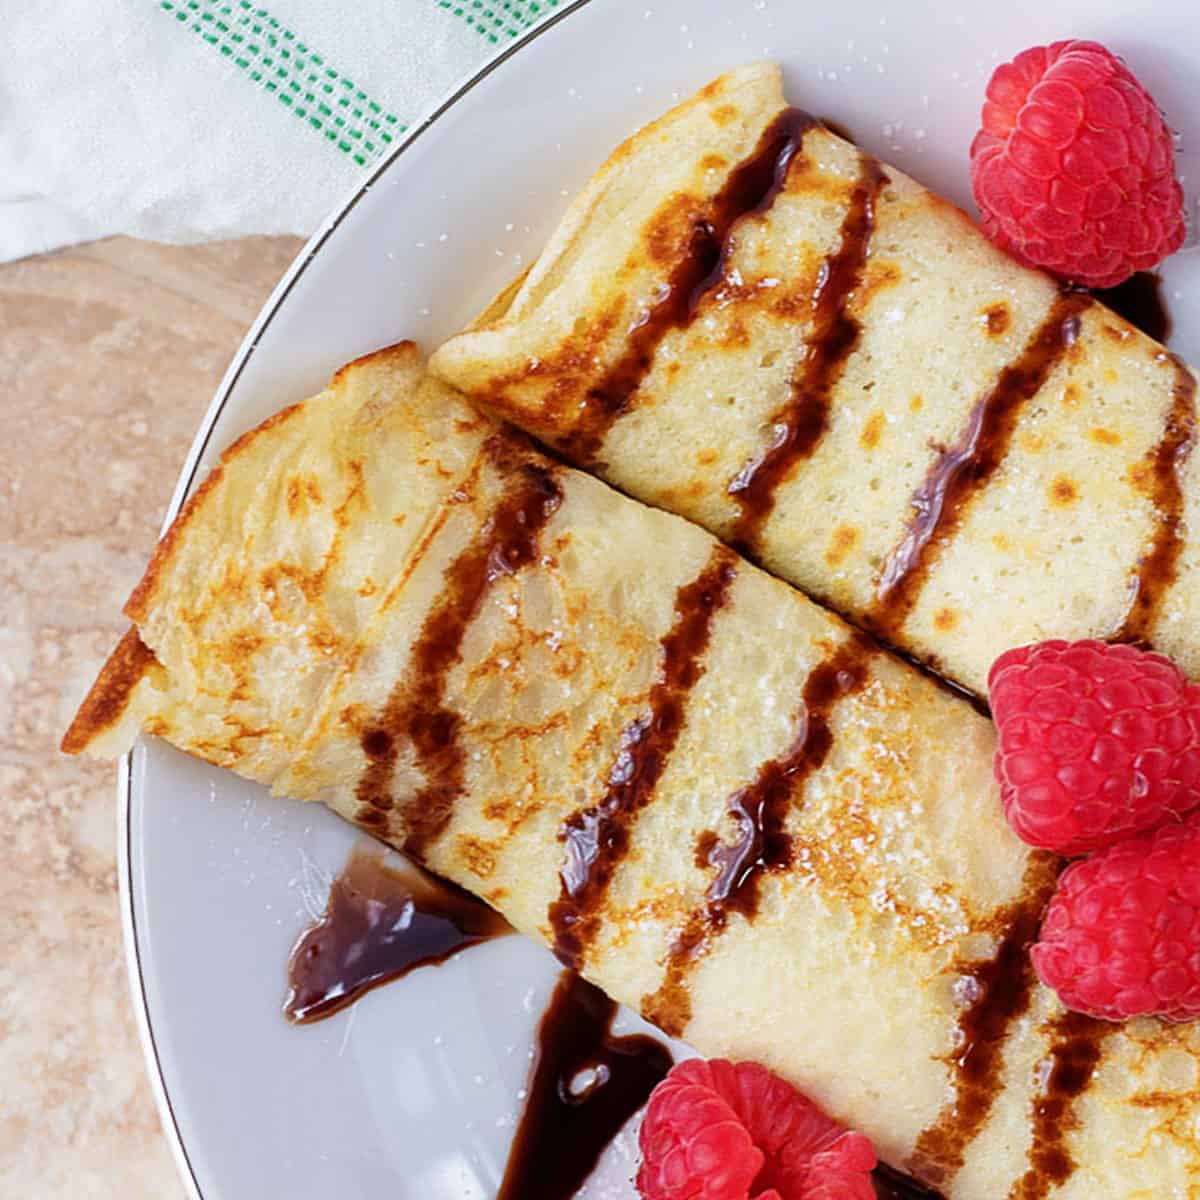 Crepes drizzled with chocolate sauce and topped with fresh raspberries.